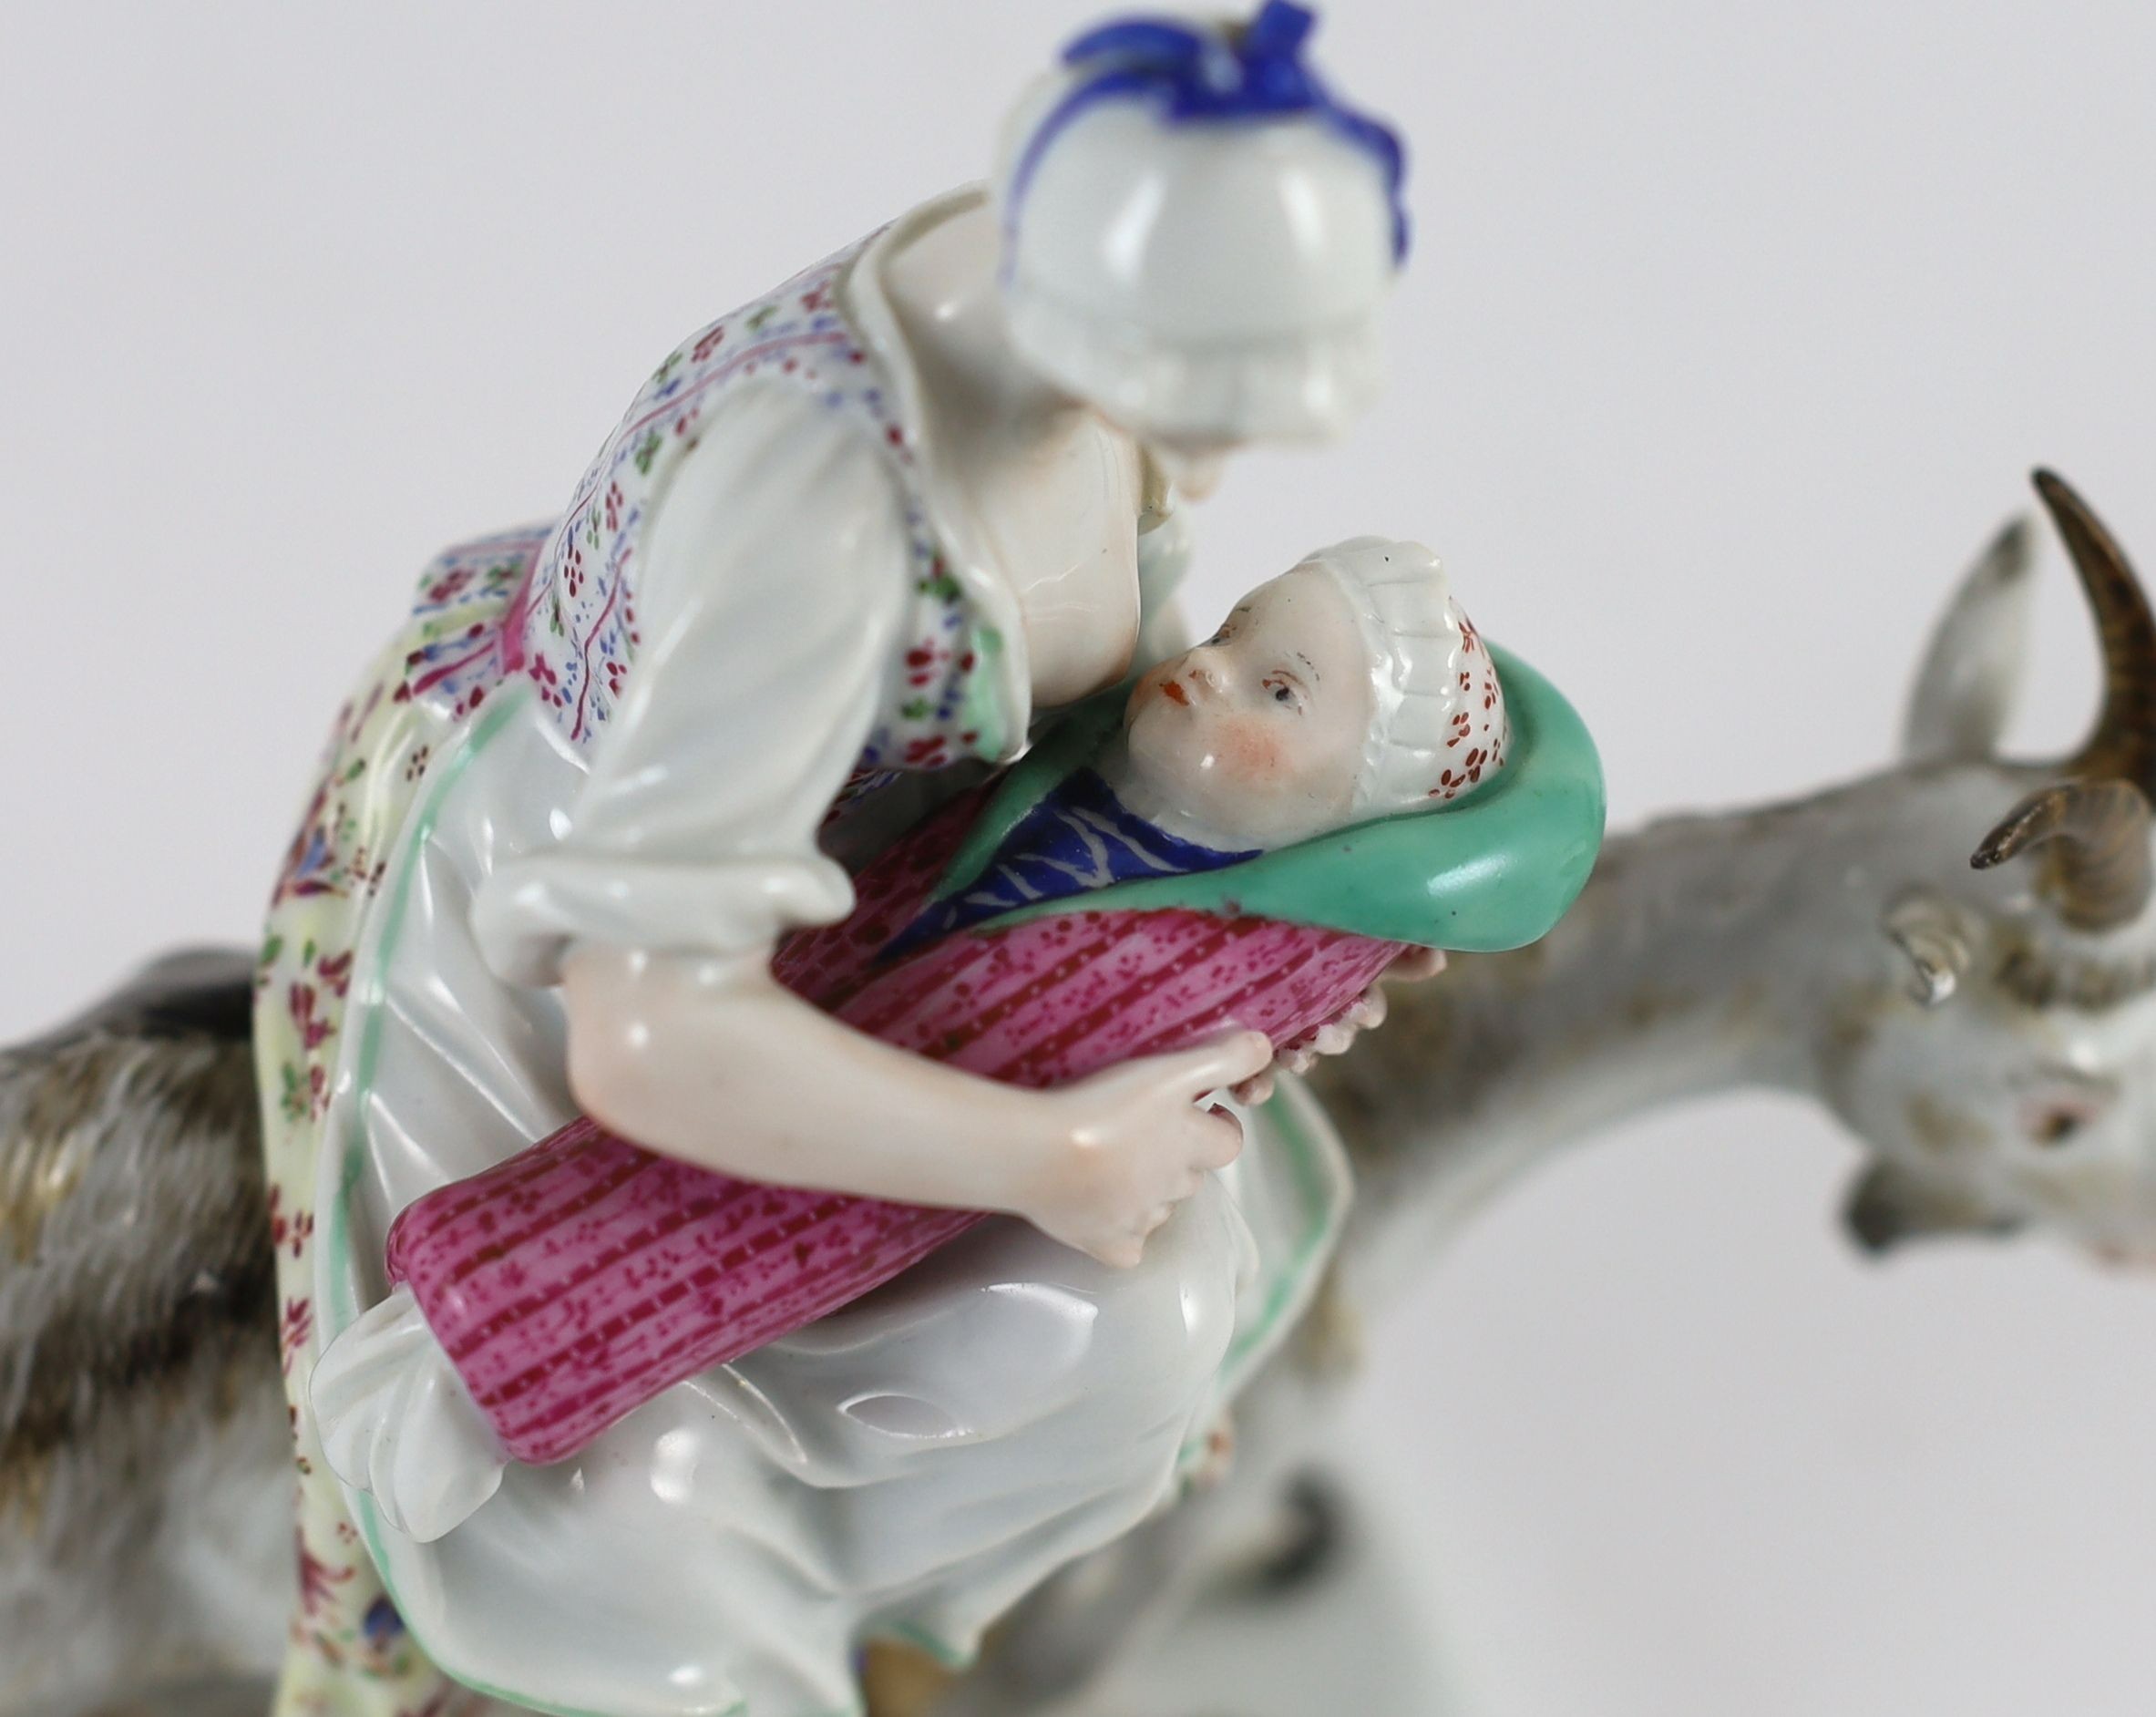 A Meissen group of the tailor’s wife riding a goat, 19th century, 18 cm high